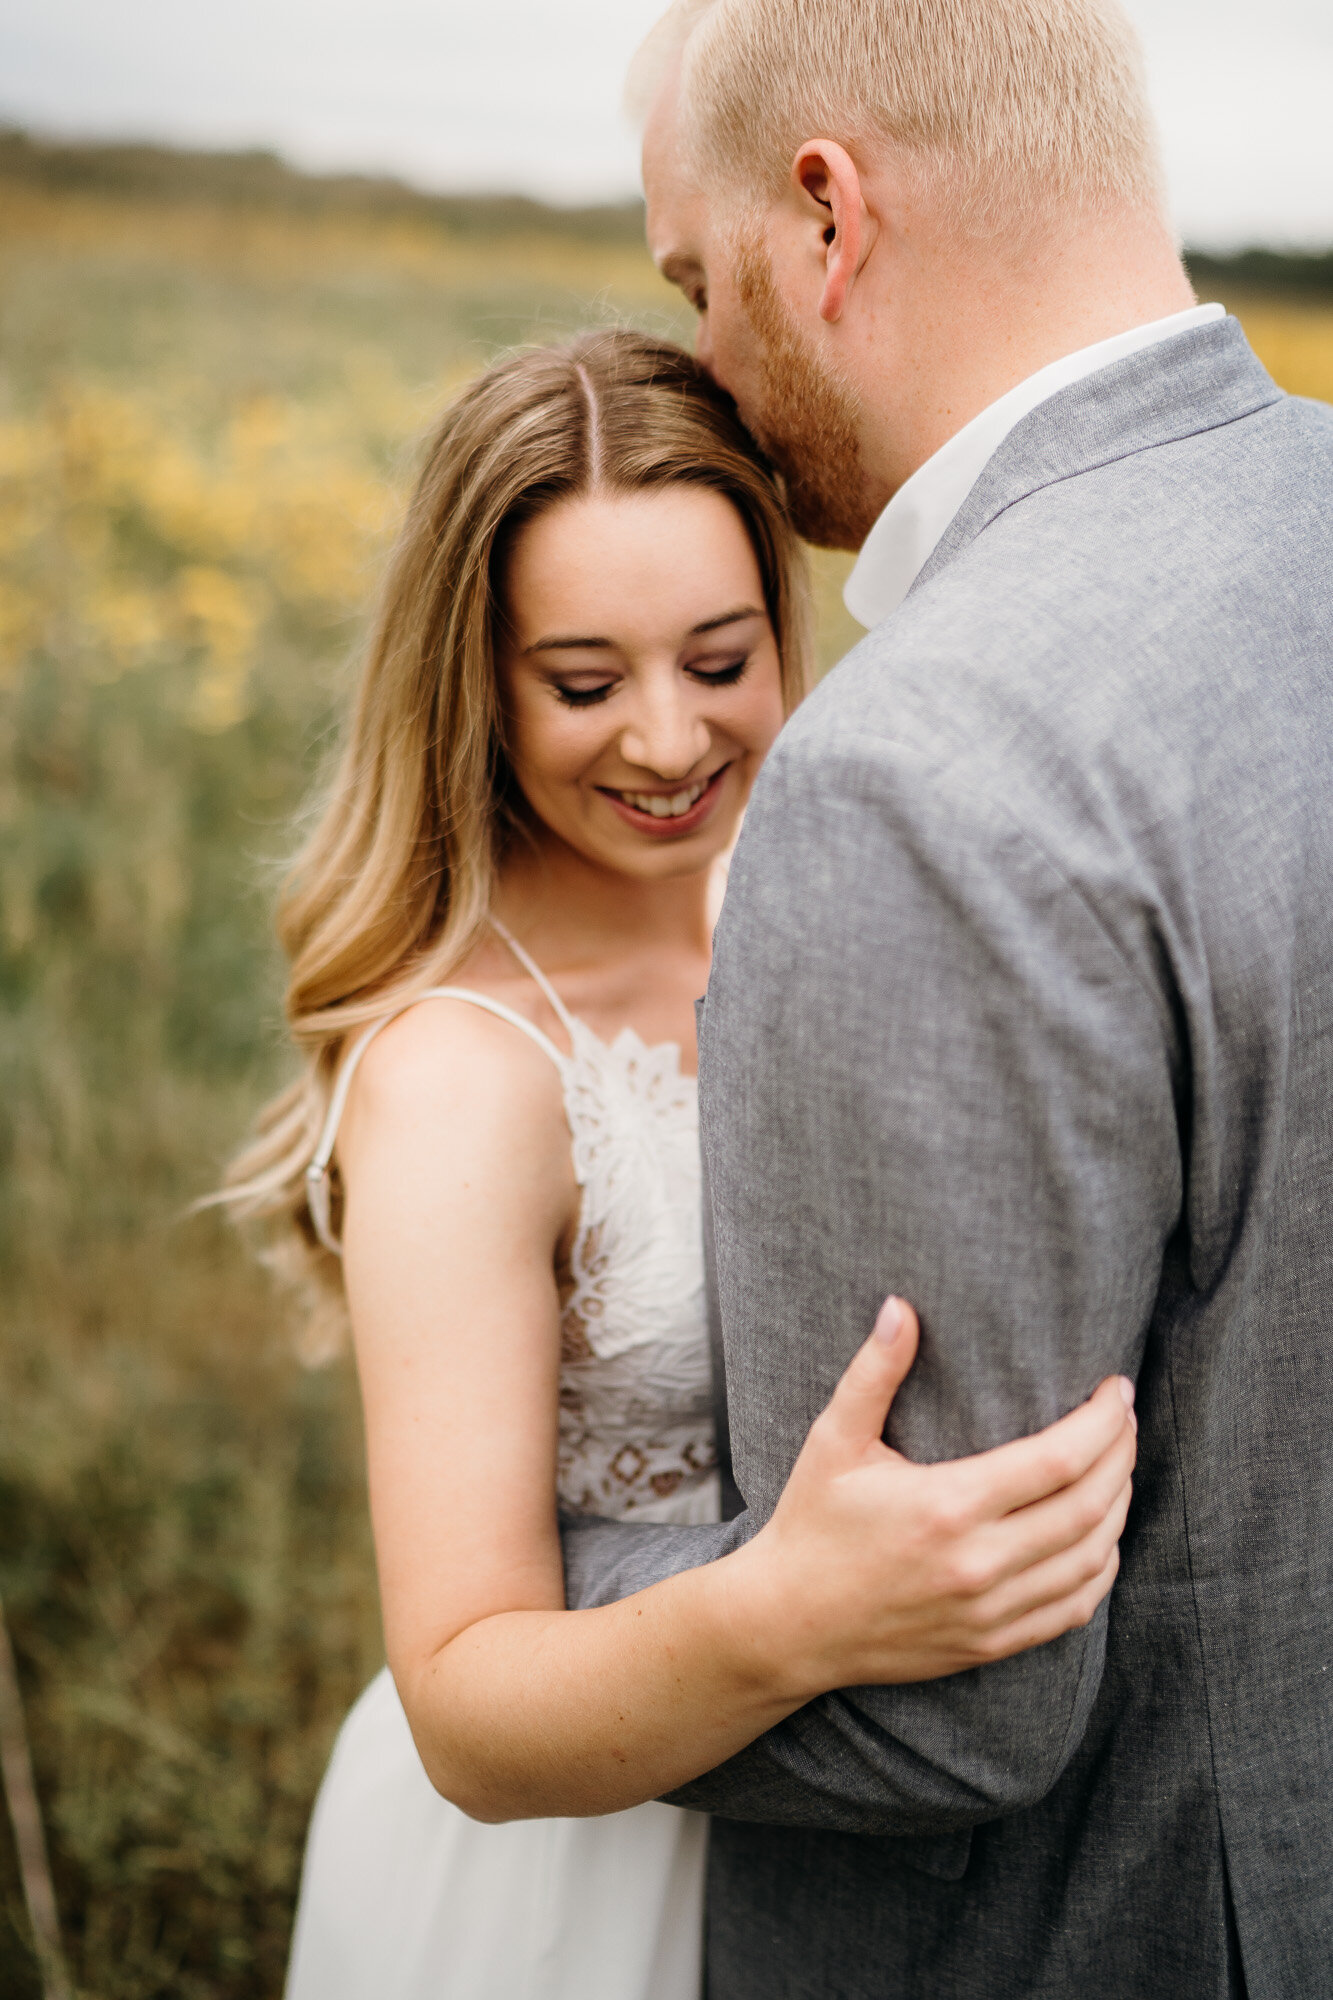 Romantic Late Summer Meadow Engagement Session captured by Kevin Kienitz Photography featured on CHI thee WED